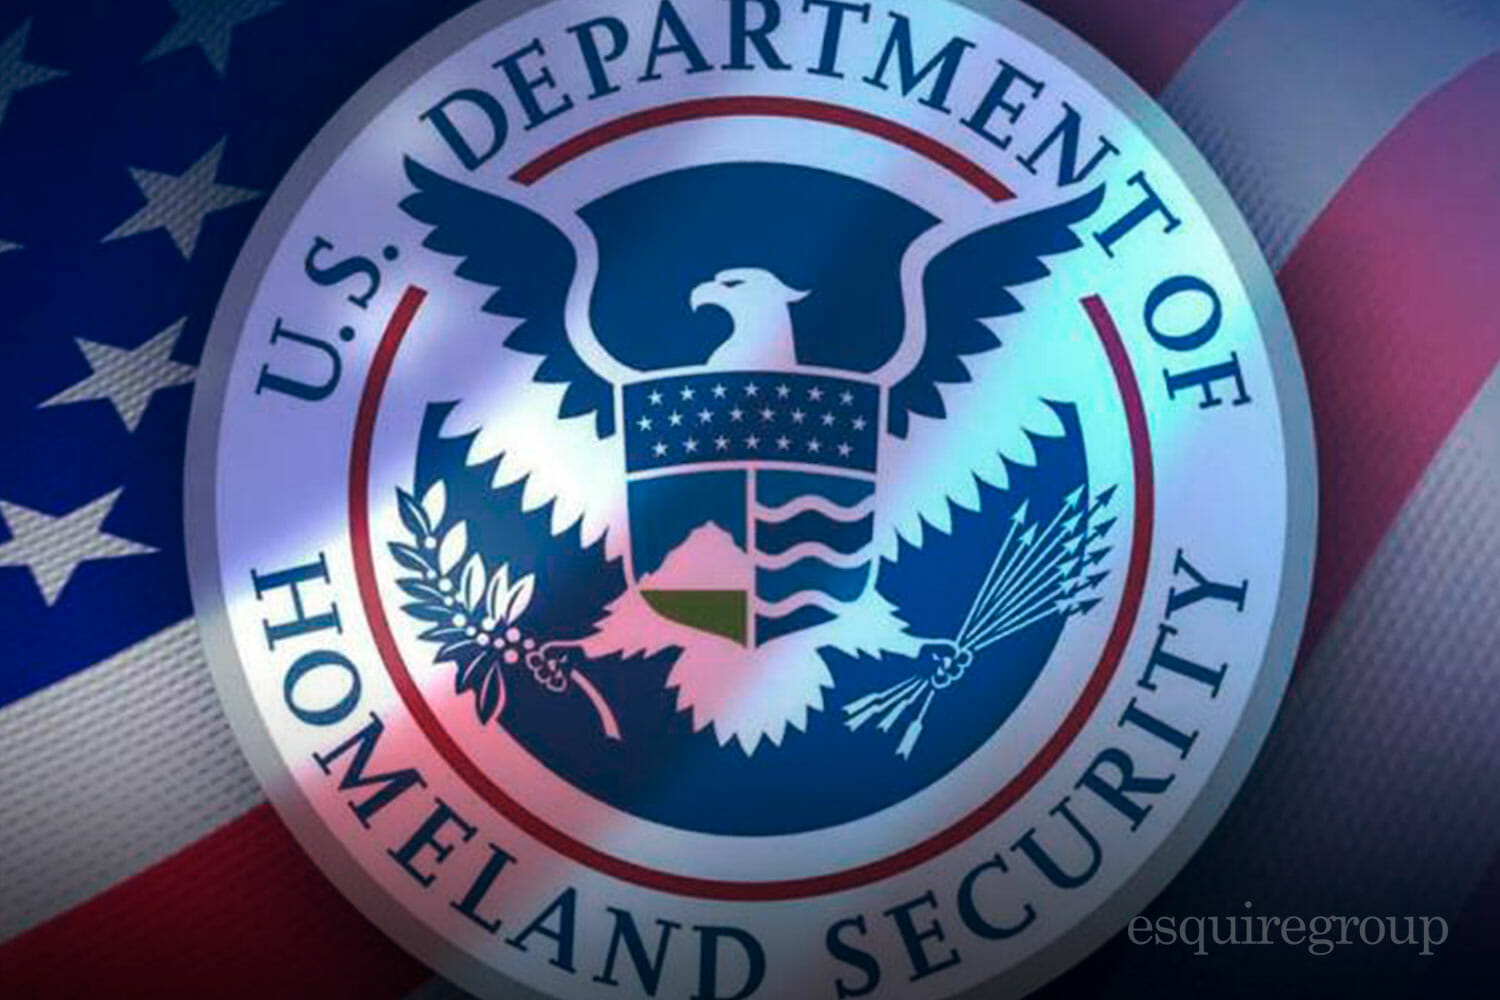 Unfiled or unpaid taxes? Plan on a meeting with Homeland Security the next time you come to the U.S.